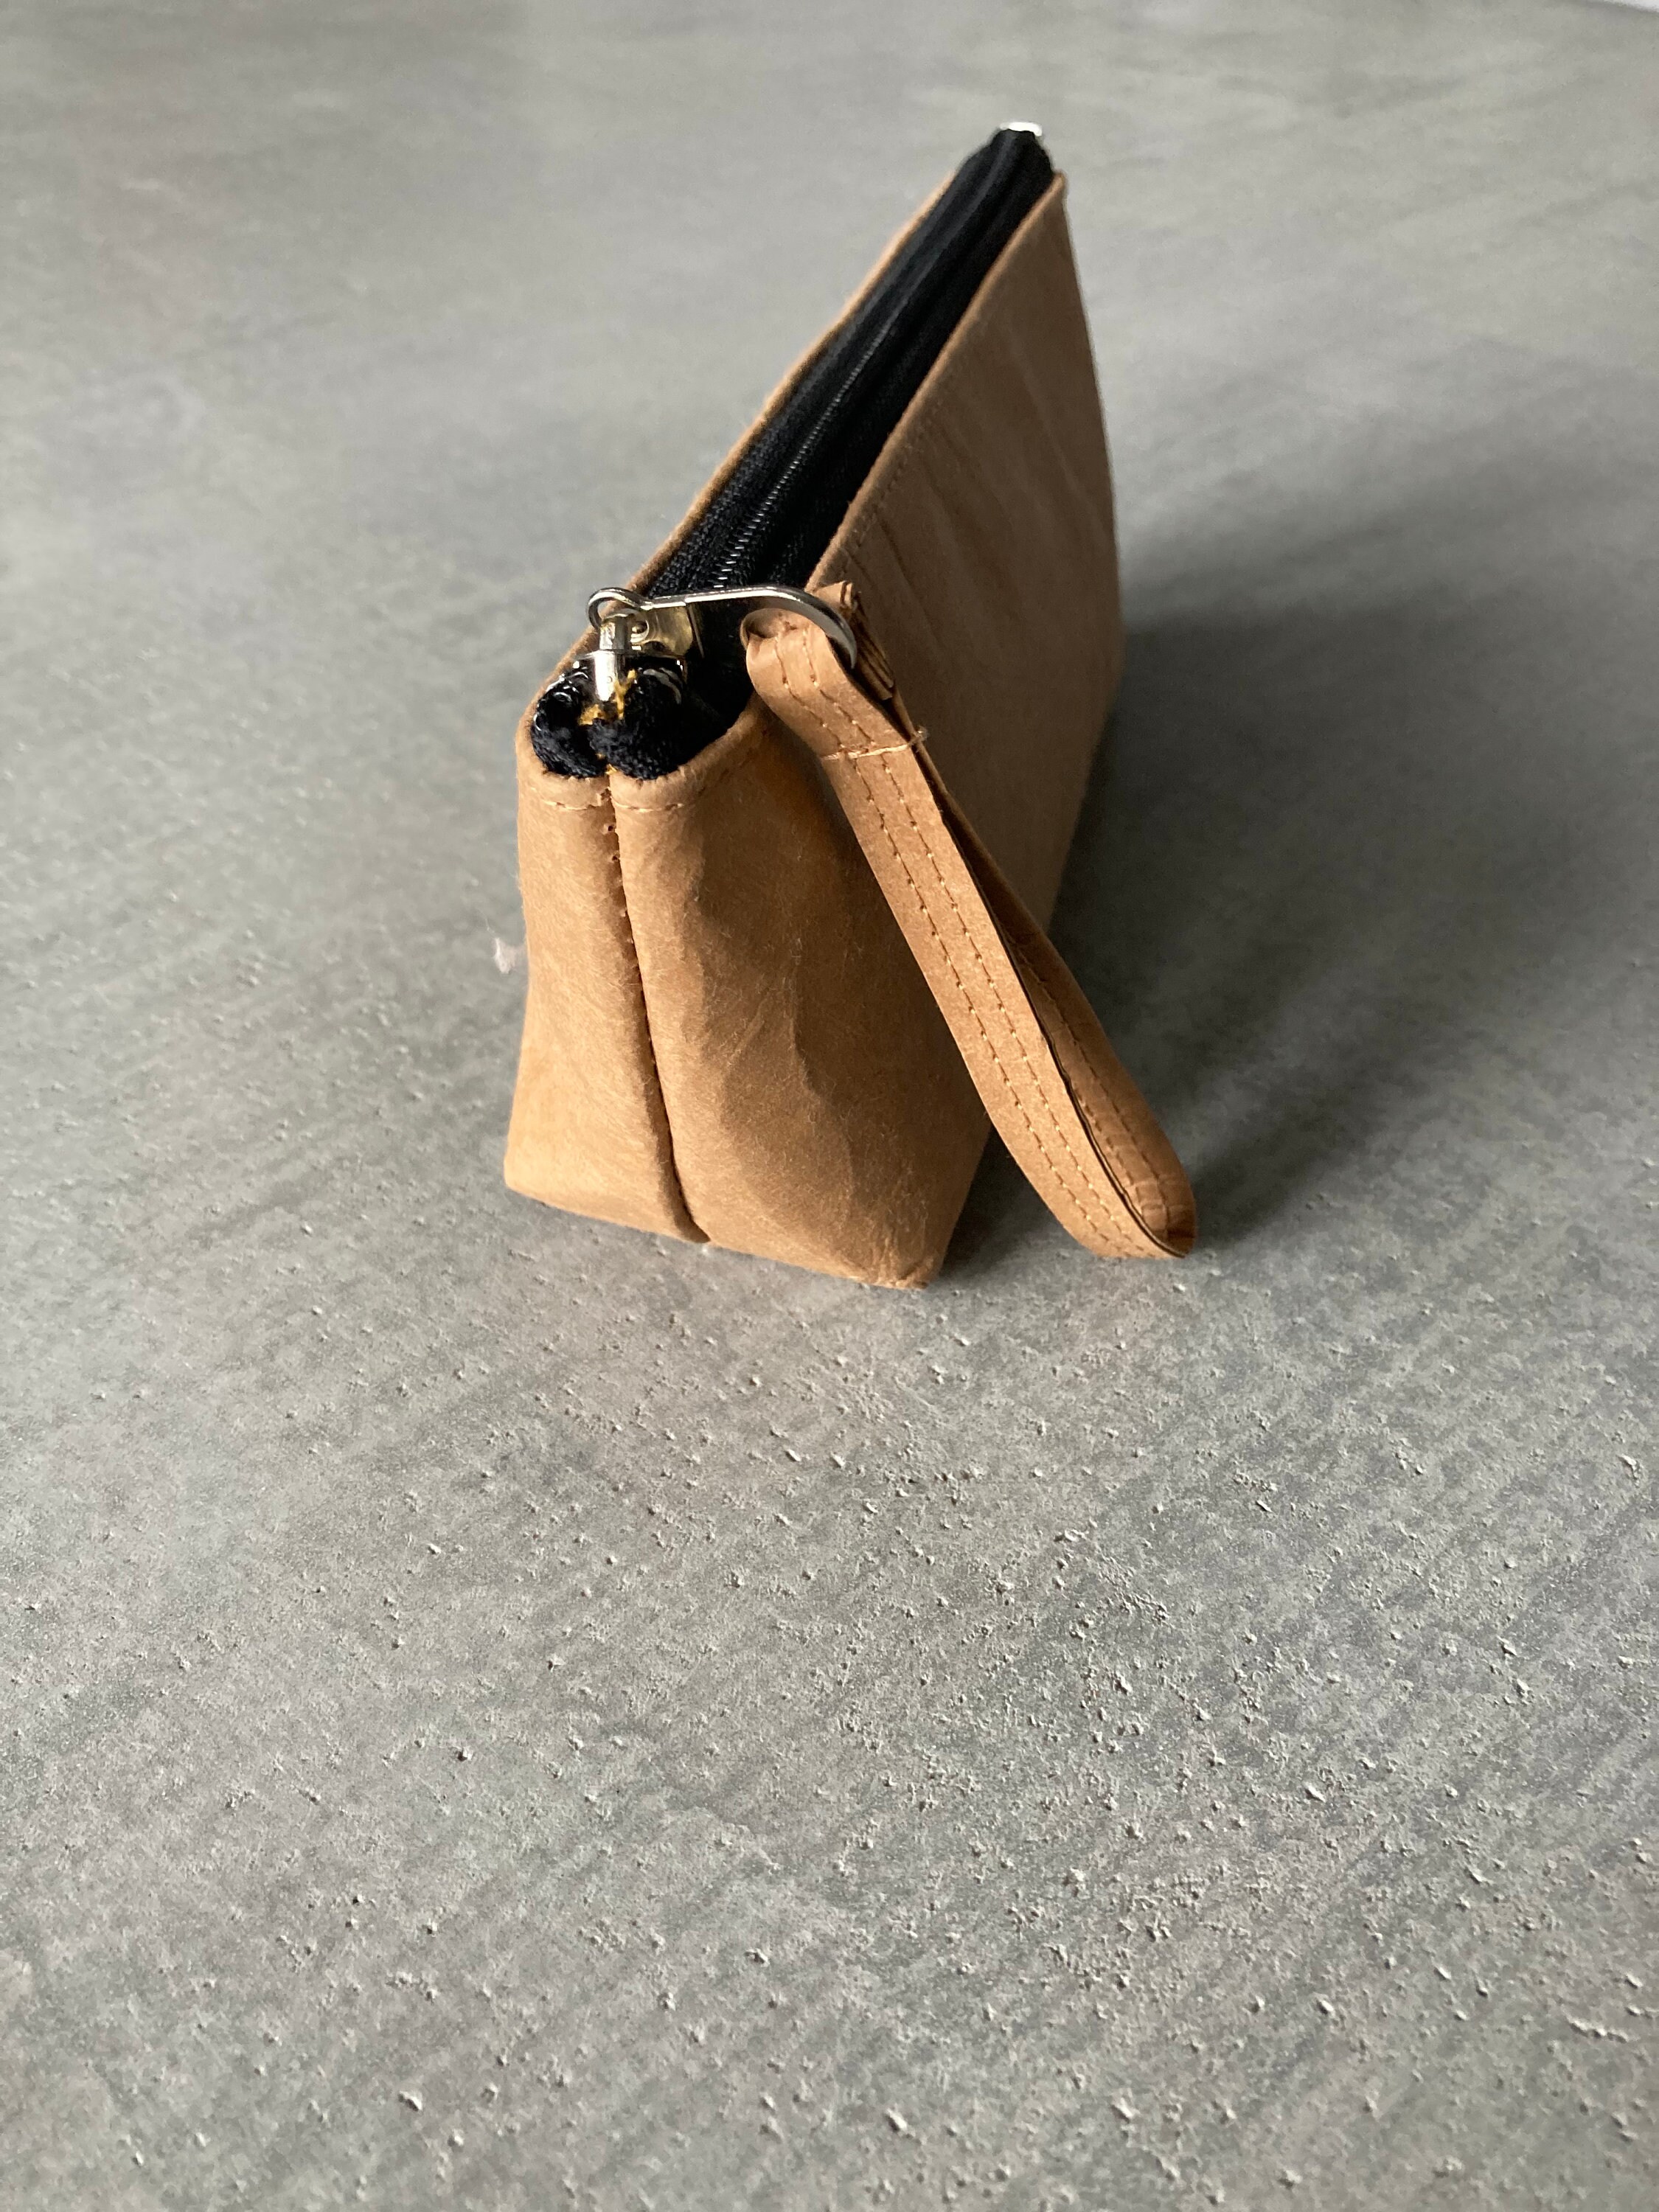 Mini-pencil Case / Etui / Toiletry Bag Made From Kraft Paper 